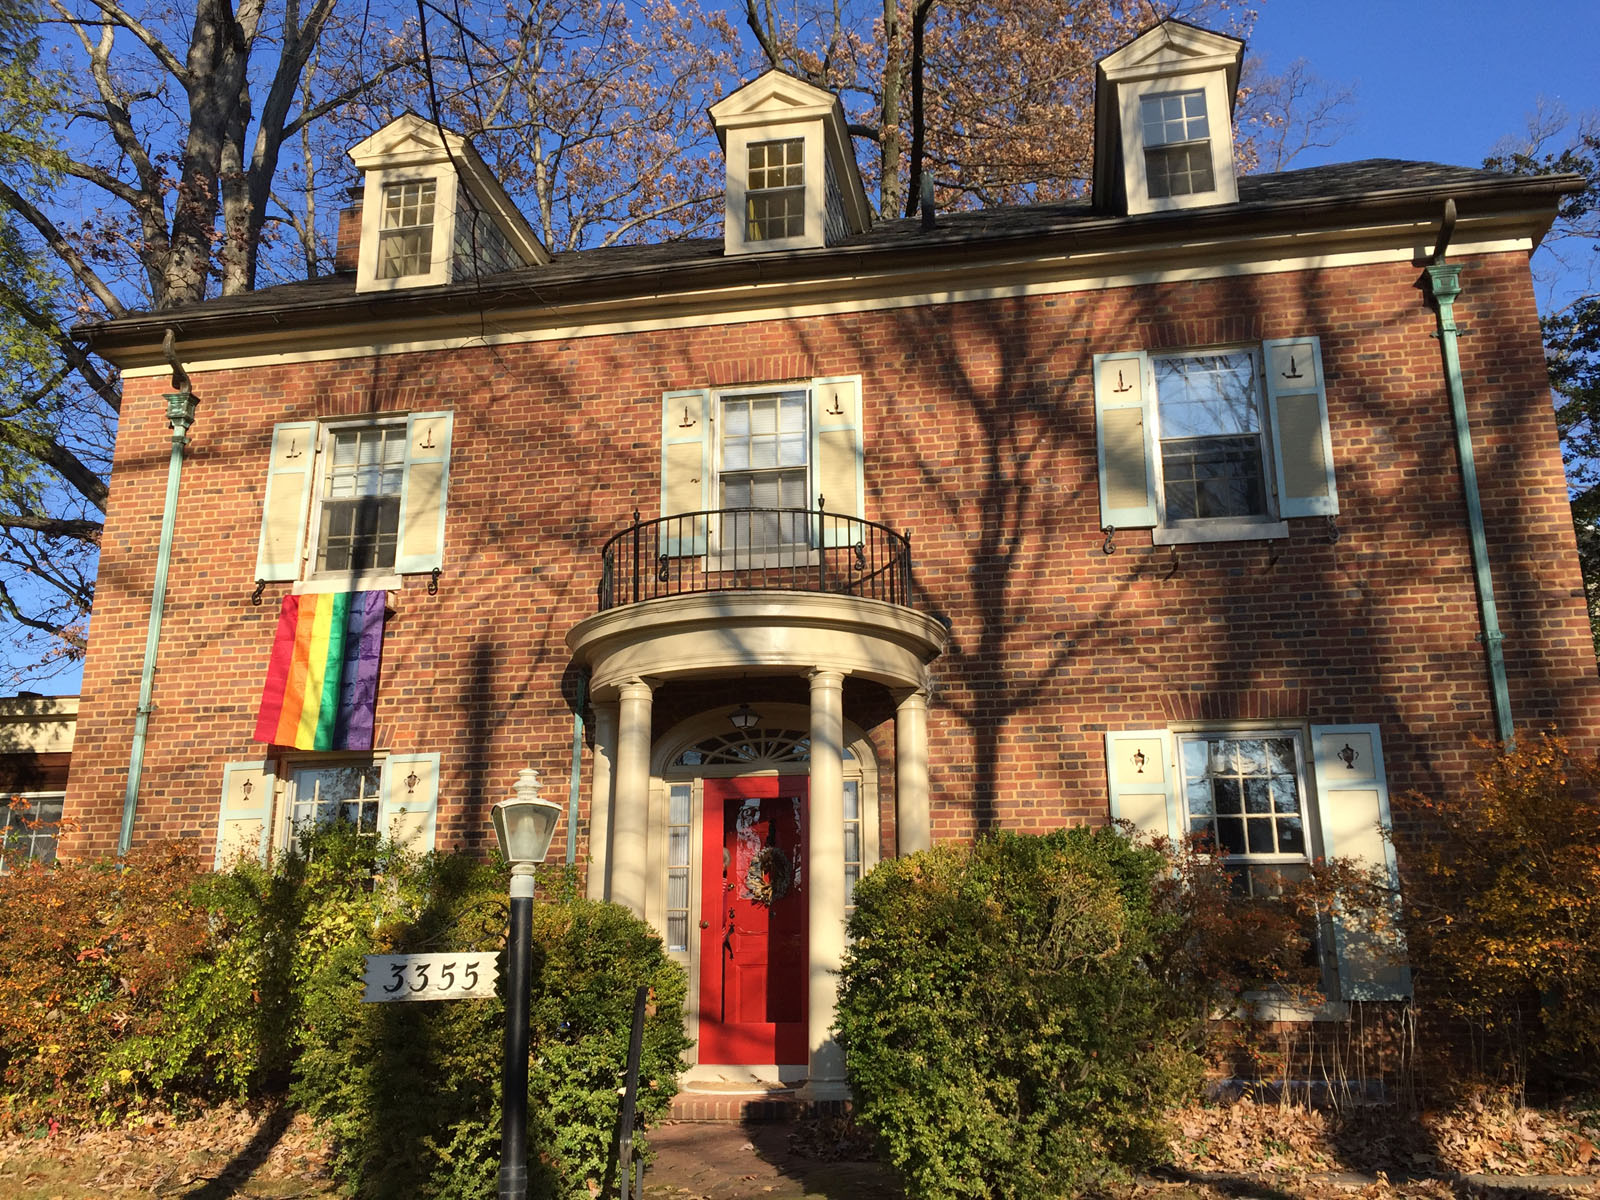 As of Friday, there were at least nine rainbow flags flying at houses near Pence's temporary home. (WTOP/Michelle Basch)